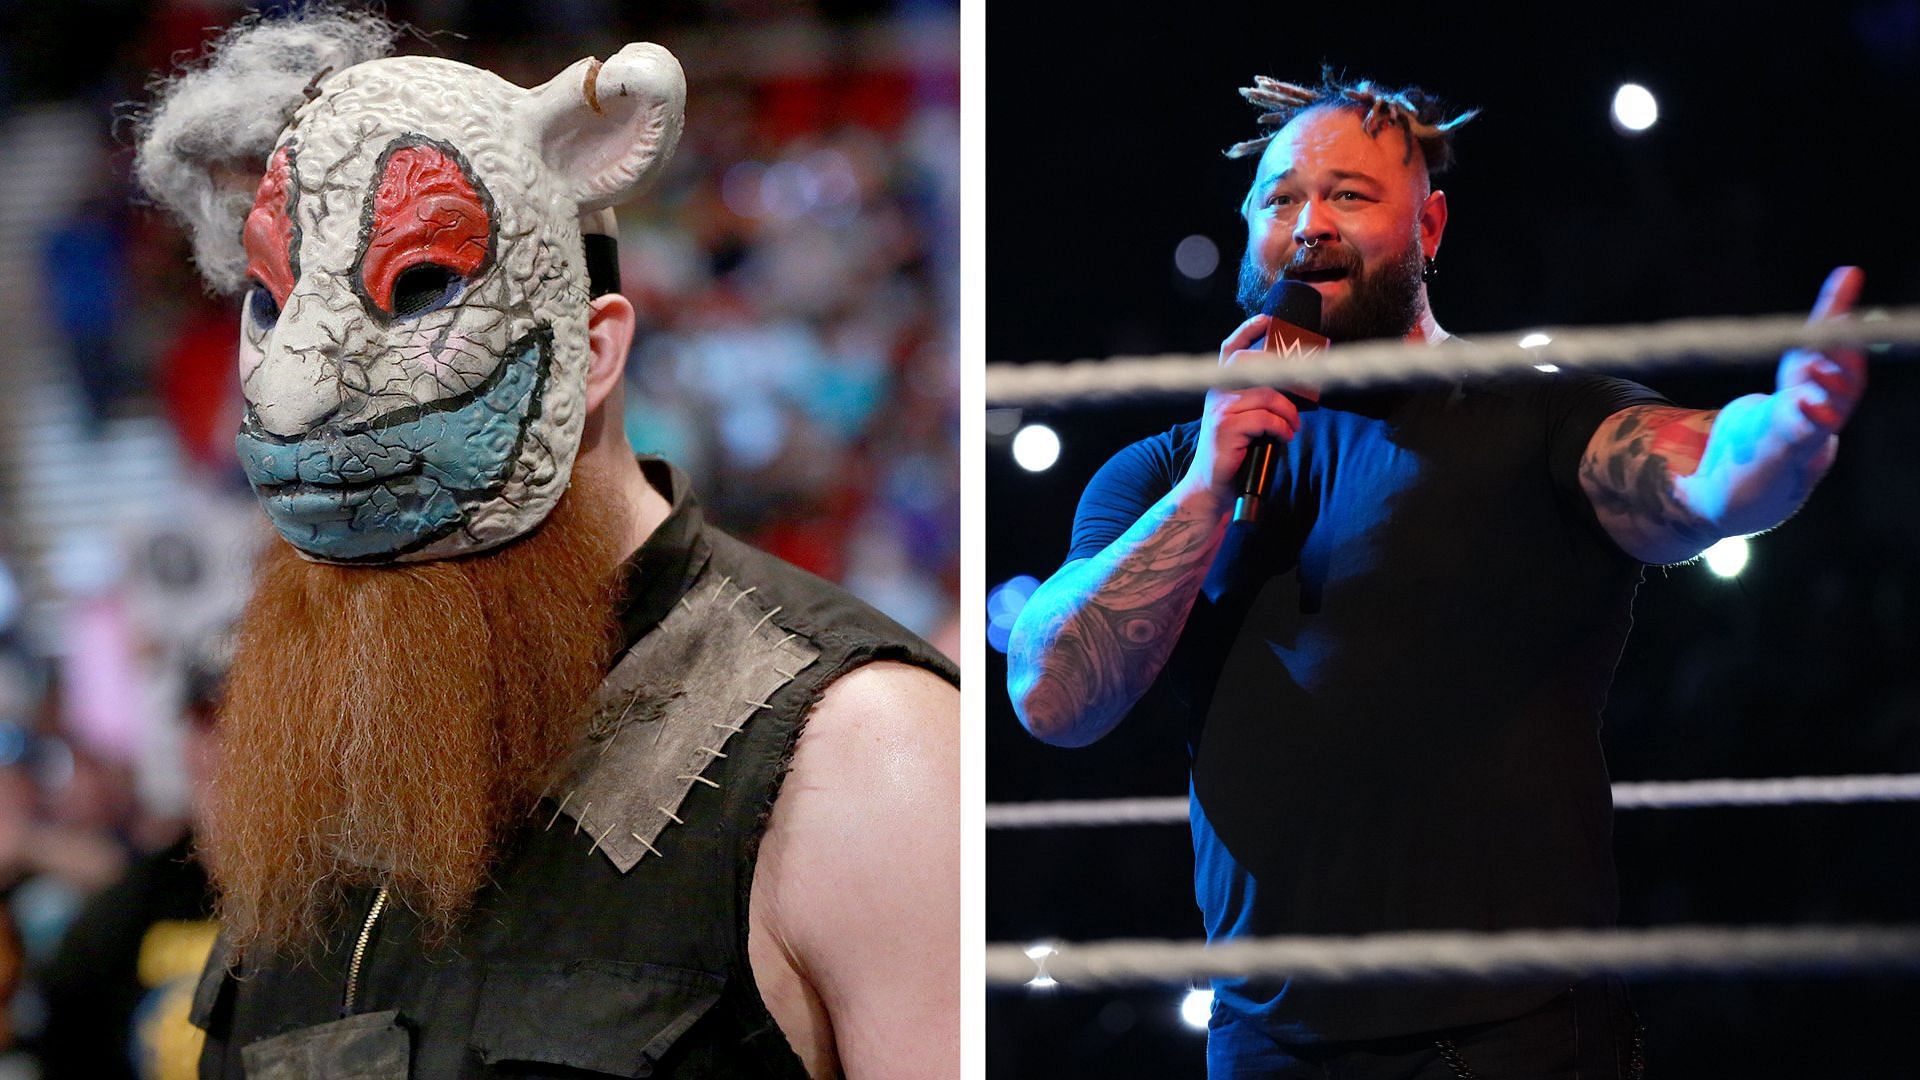 Erick Rowan could potentially return to WWE